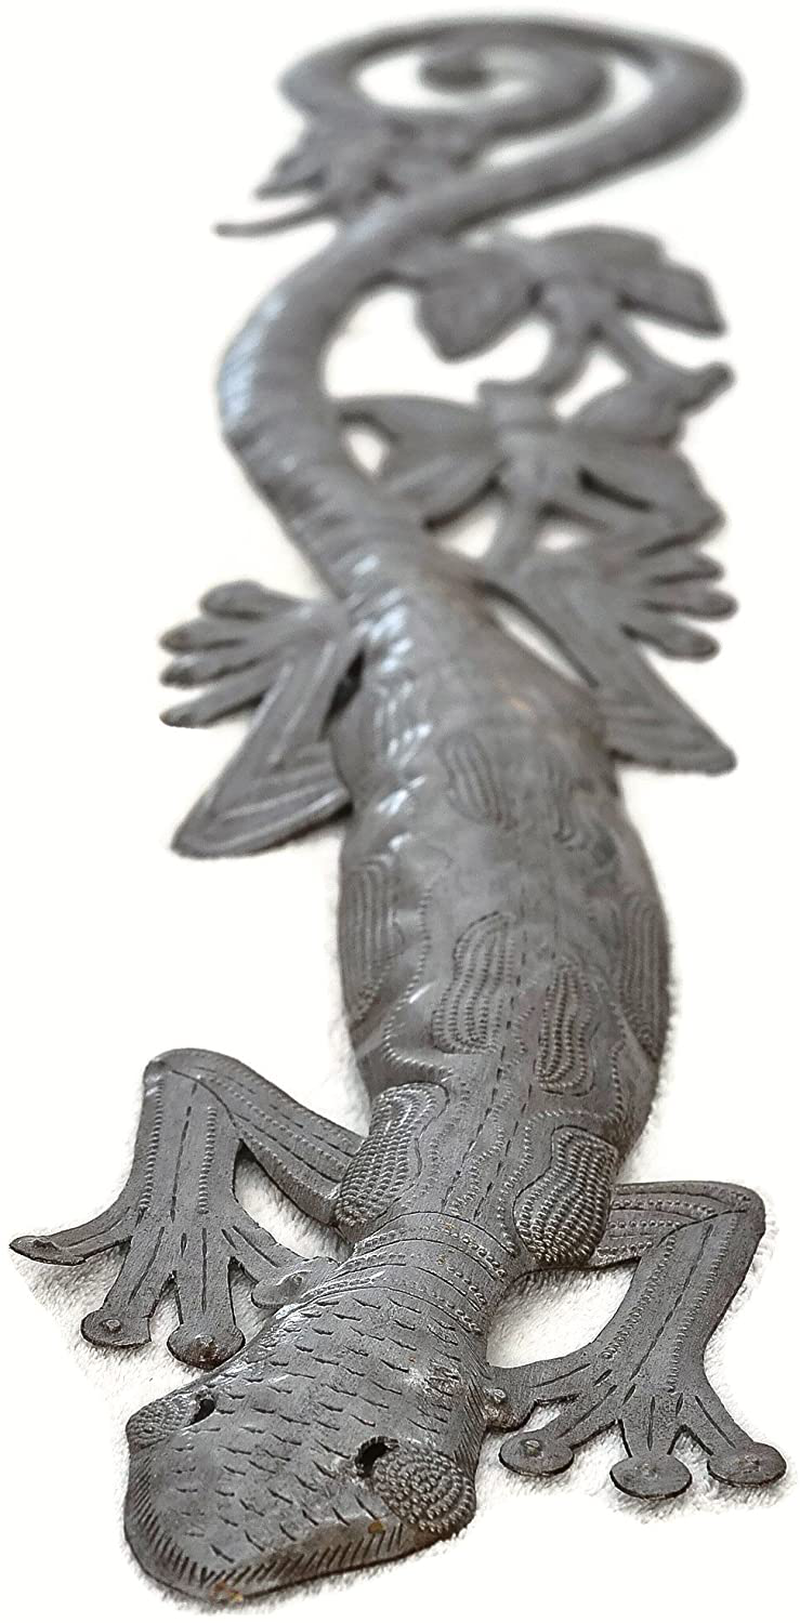 It's Cactus Gecko Climbing The Wall, Decorative Plaques, Indoor and Outdoor, Handmade in Haiti from Recycled Steel Drums 6 x 35 inches Home & Garden > Decor > Artwork > Sculptures & Statues It's Cactus   